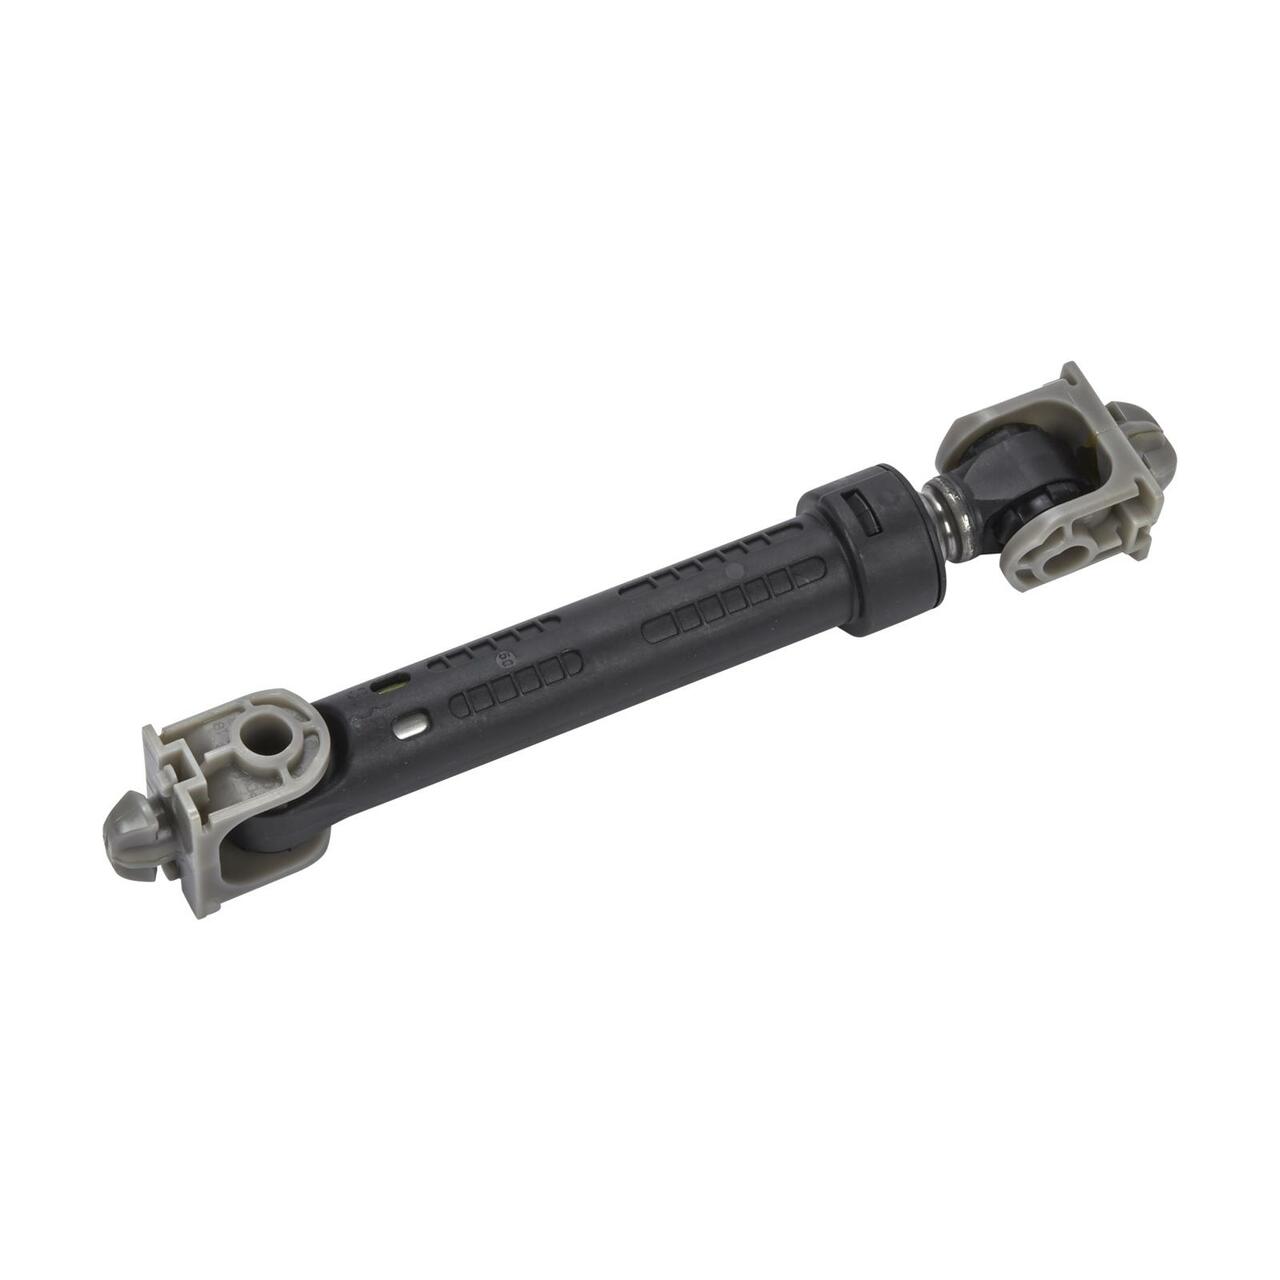 Whirlpool Washer Front Load Shock Absorber. Part #WP8182703